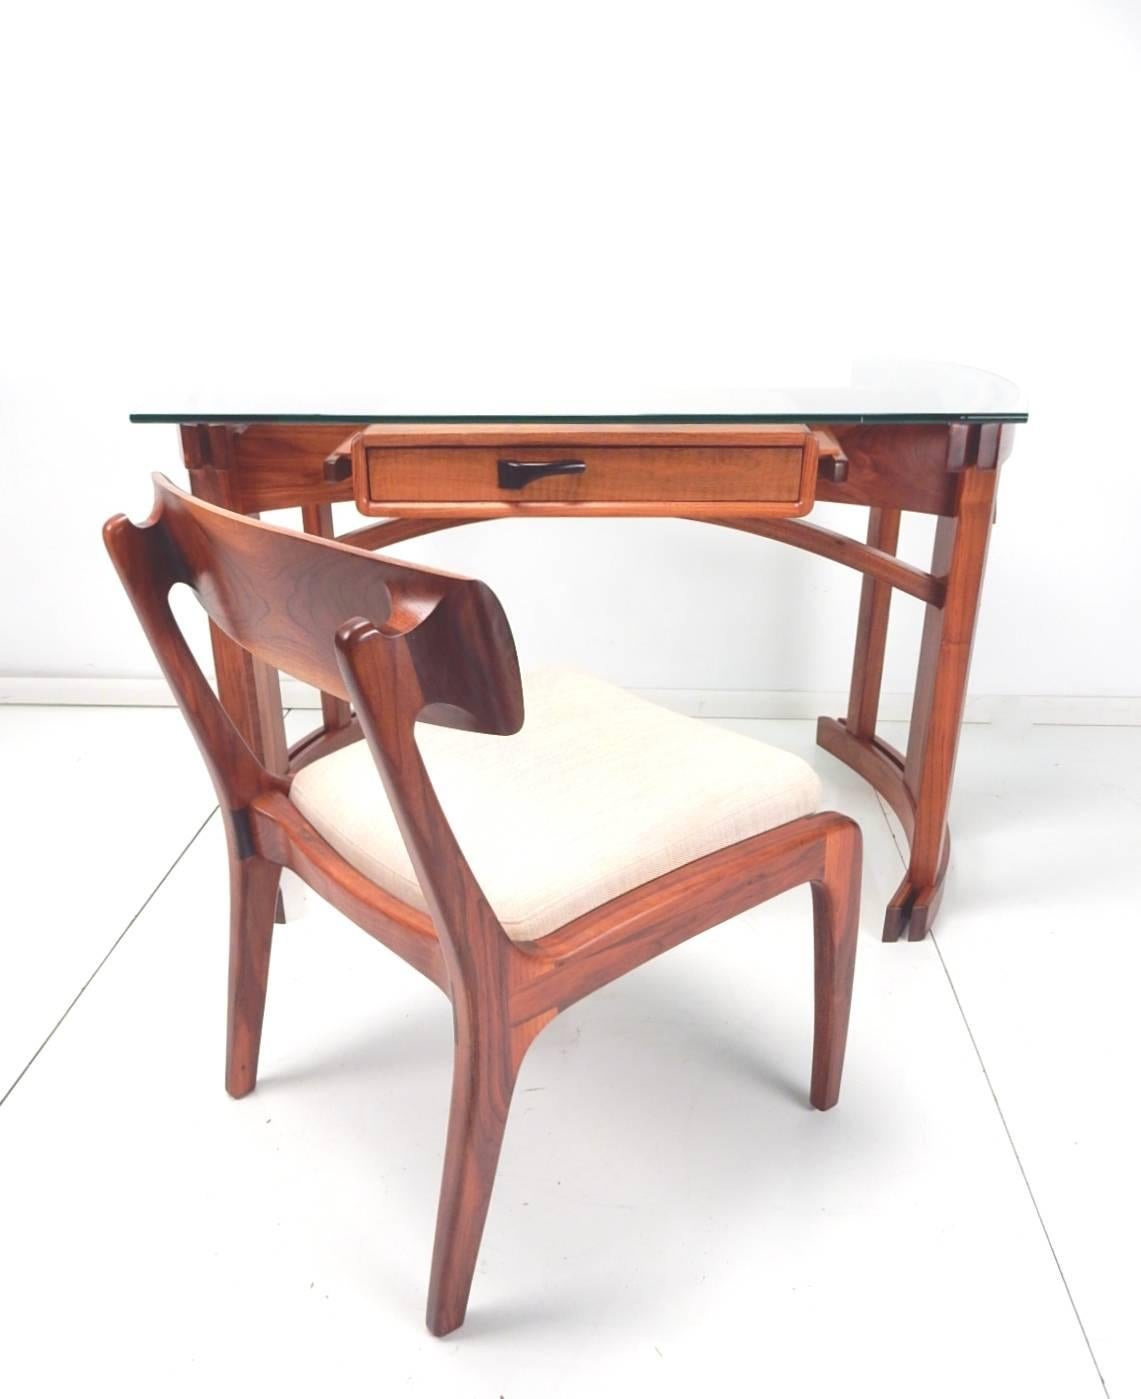 American Mid Century Modern Sculpted Art Desk and Chair by Woodworker Randy Bader